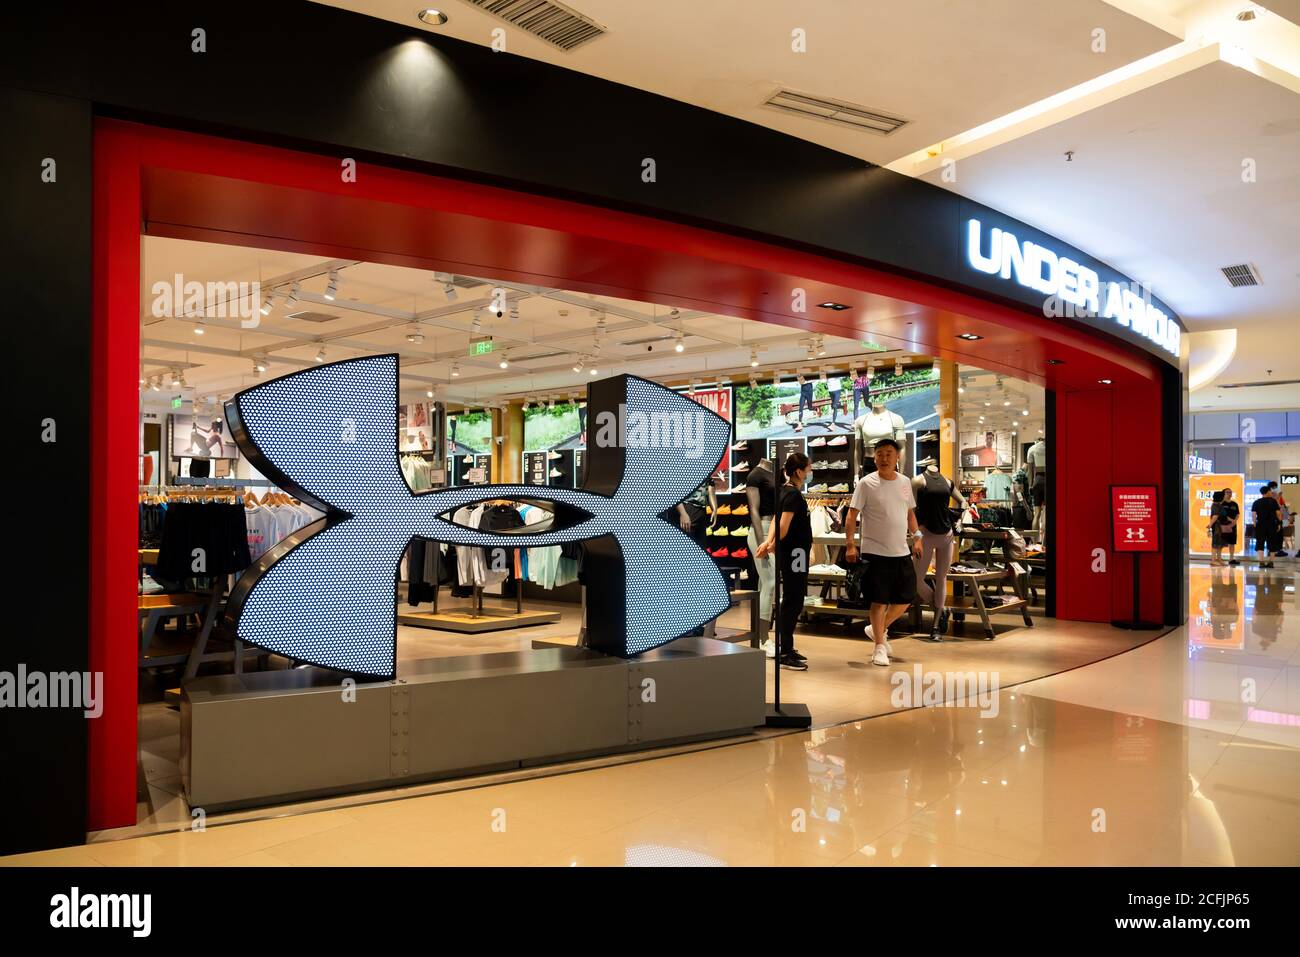 Under armour store hi-res stock photography and images - Alamy